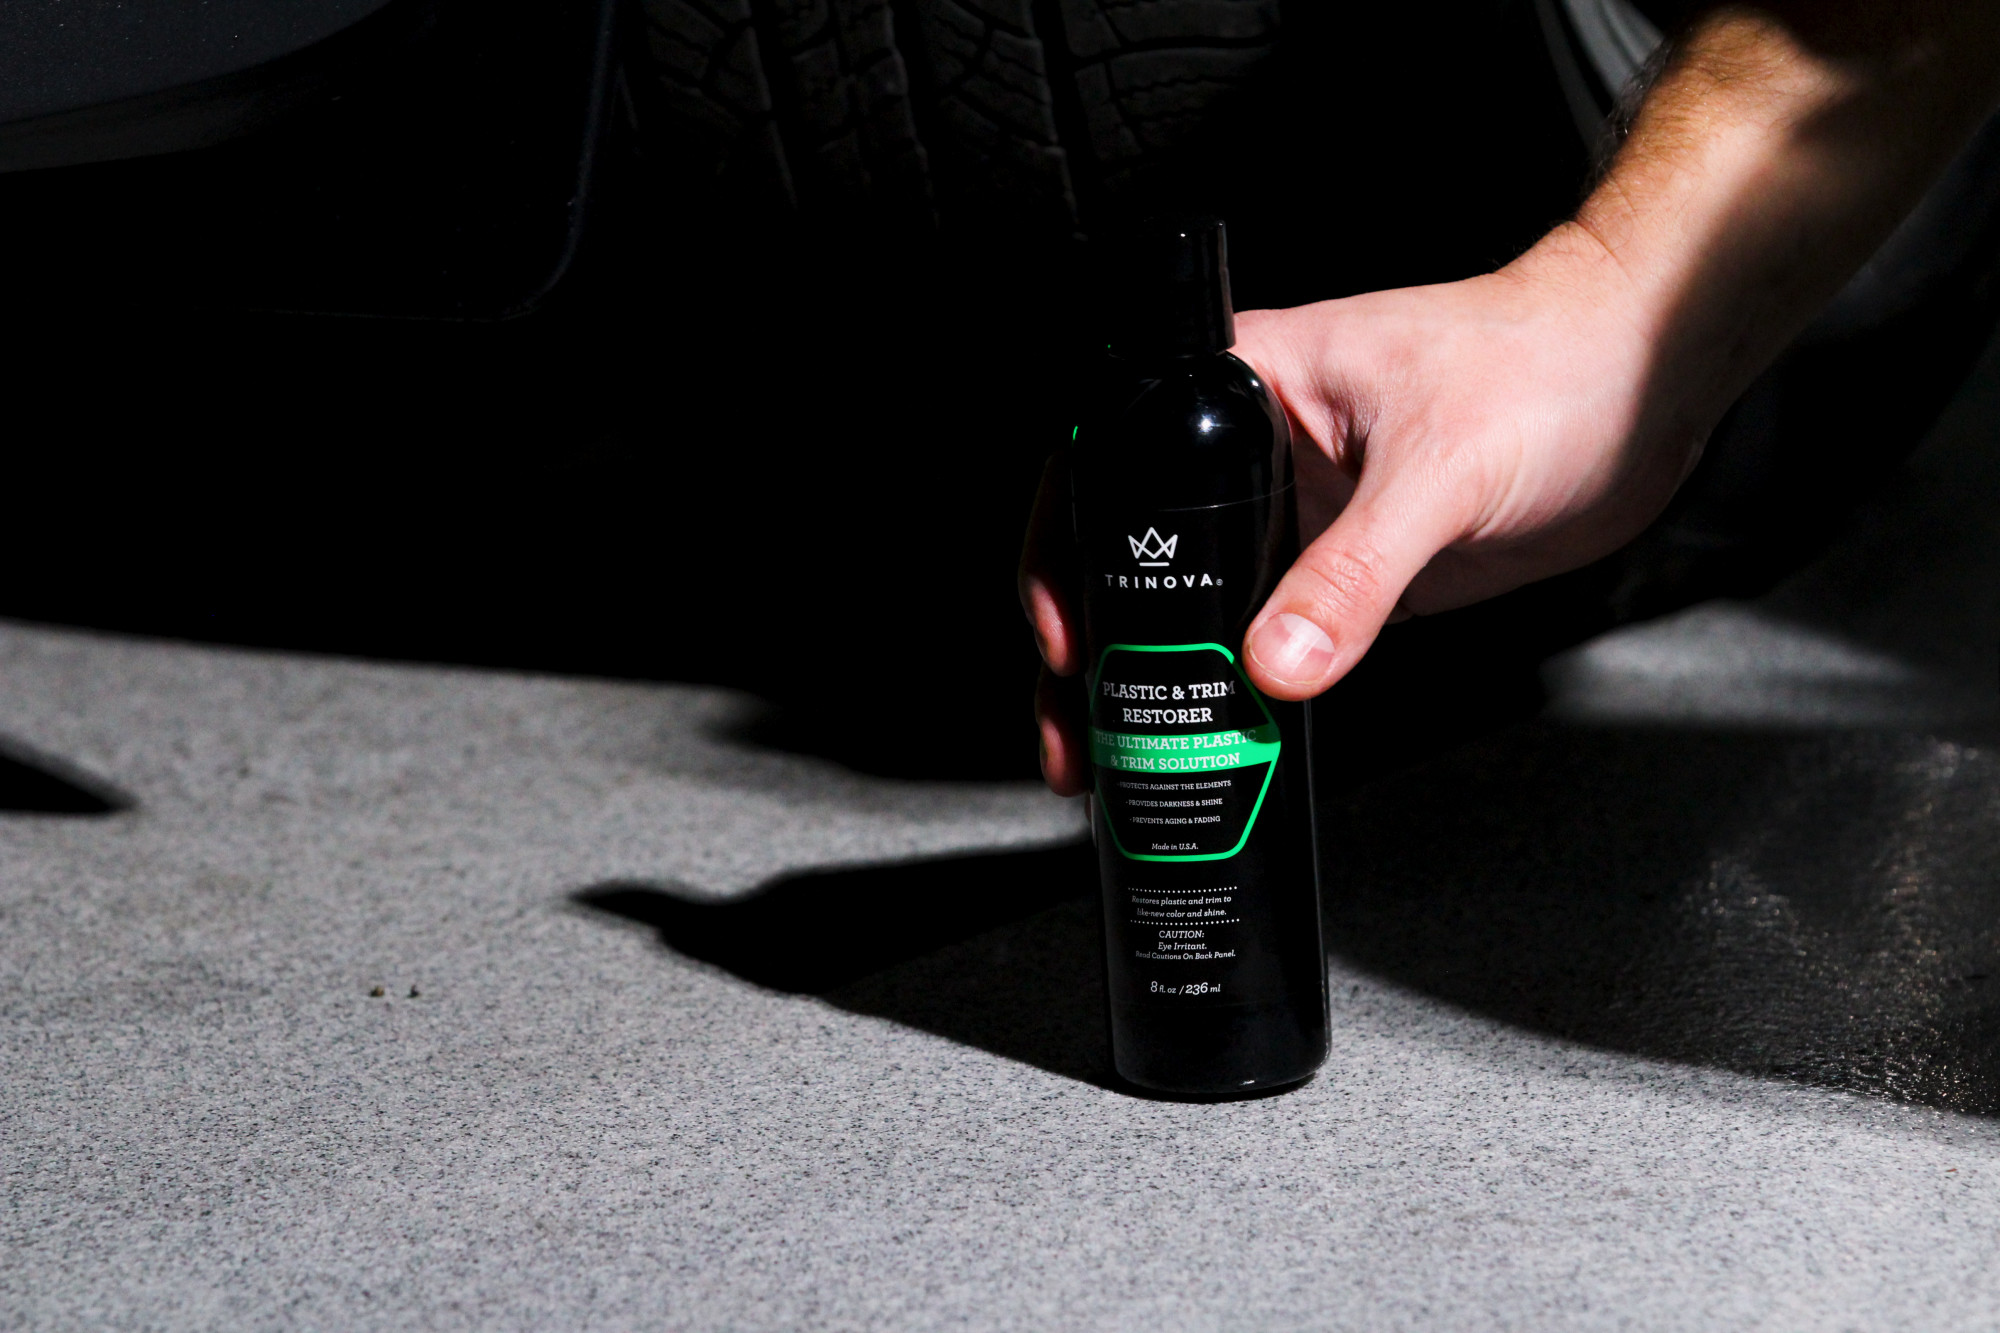 TriNova Plastic & Trim Restorer - Shines & Darkens Worn Out Plastic, Vinyl & Rubber Surfaces - Protects Cars & Motorcycles from Rain, Salt & Dirt - Prevent Fading - 8 OZ - image 9 of 11